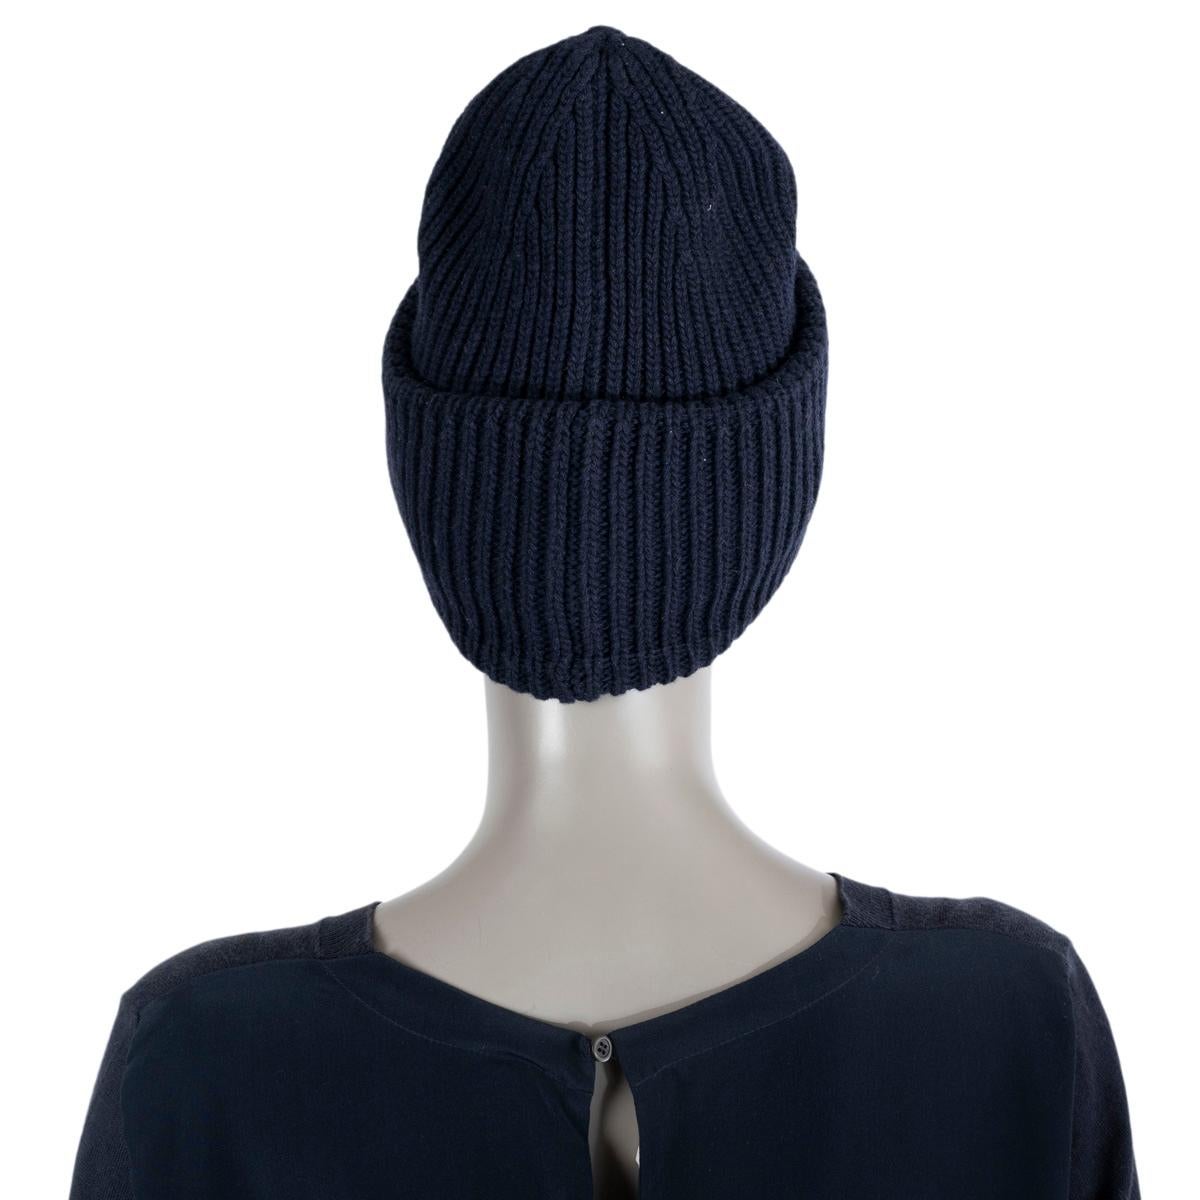 MONCLER x PALM ANGELS navy blue wool KNIT Beanie Knit Hat One Size 1